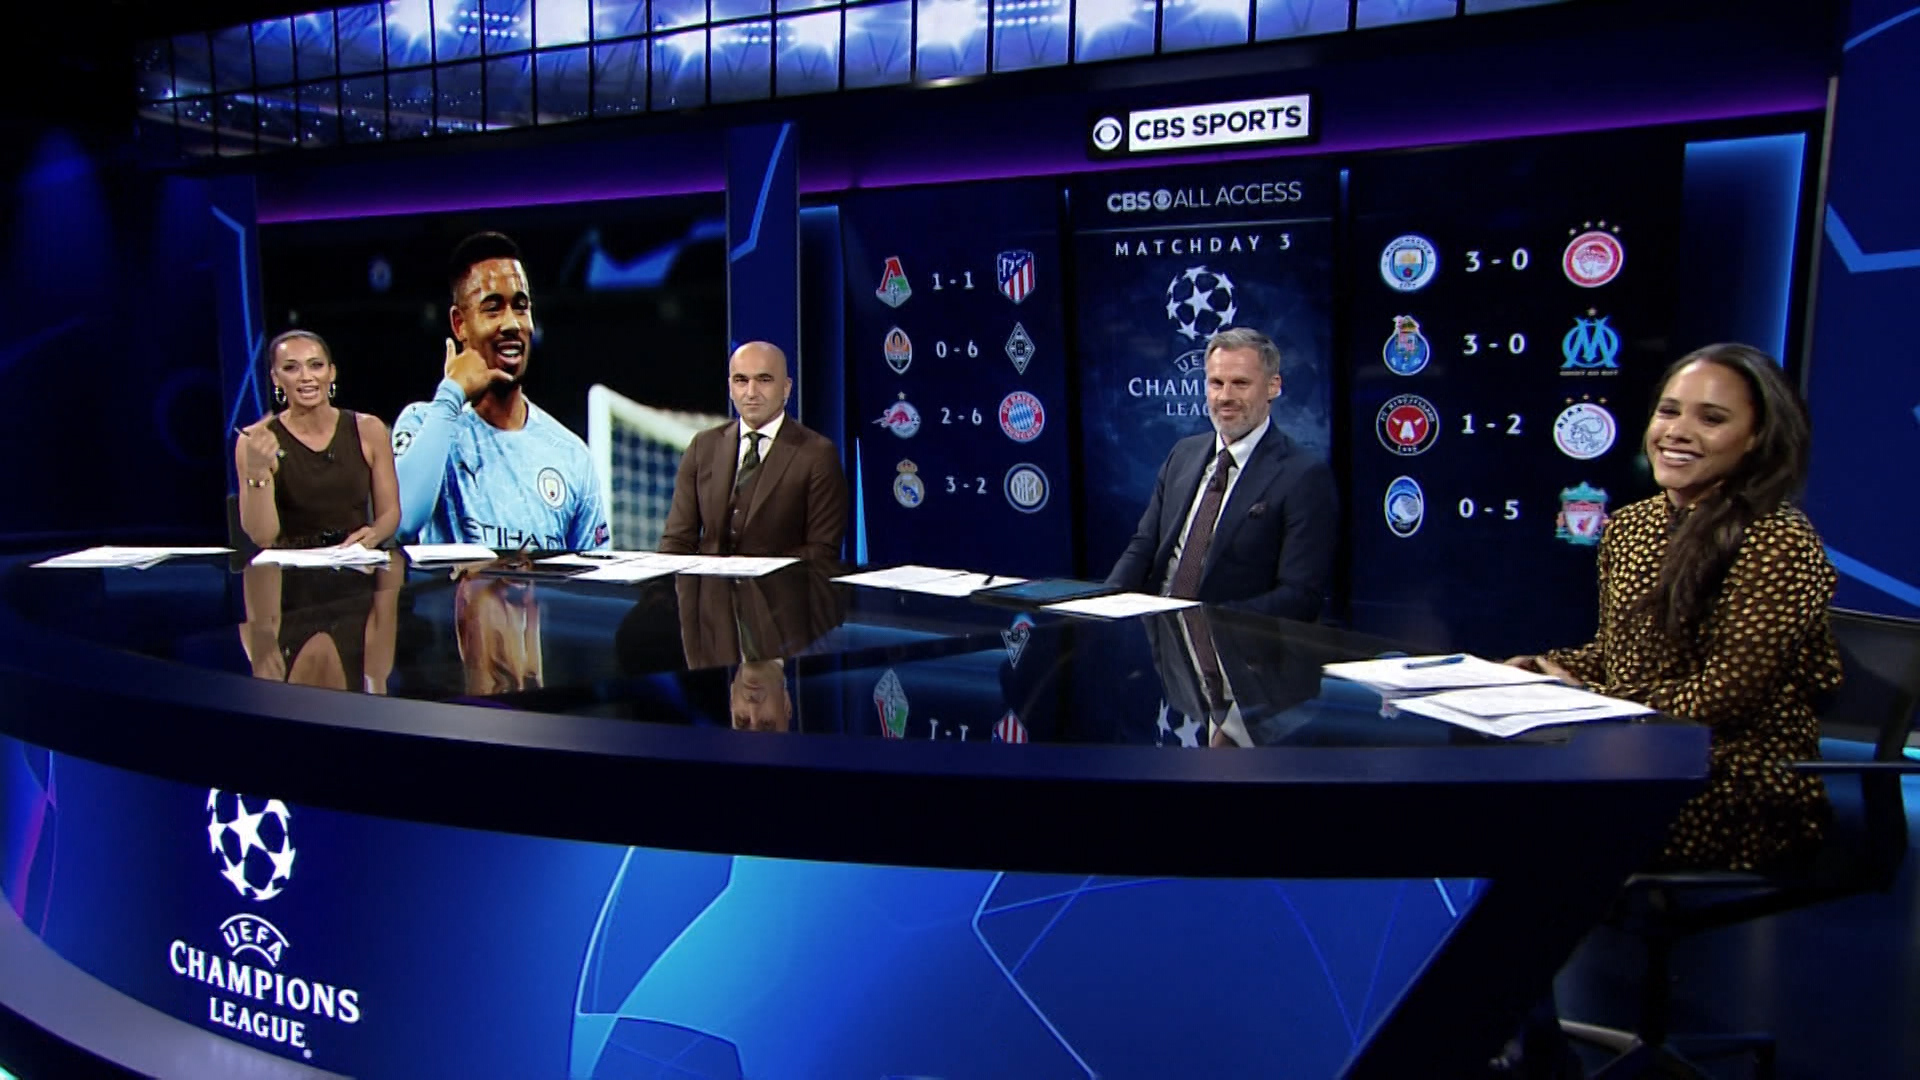 Watch UEFA Champions League Champions League Today Post Match Show - 11/03/2020